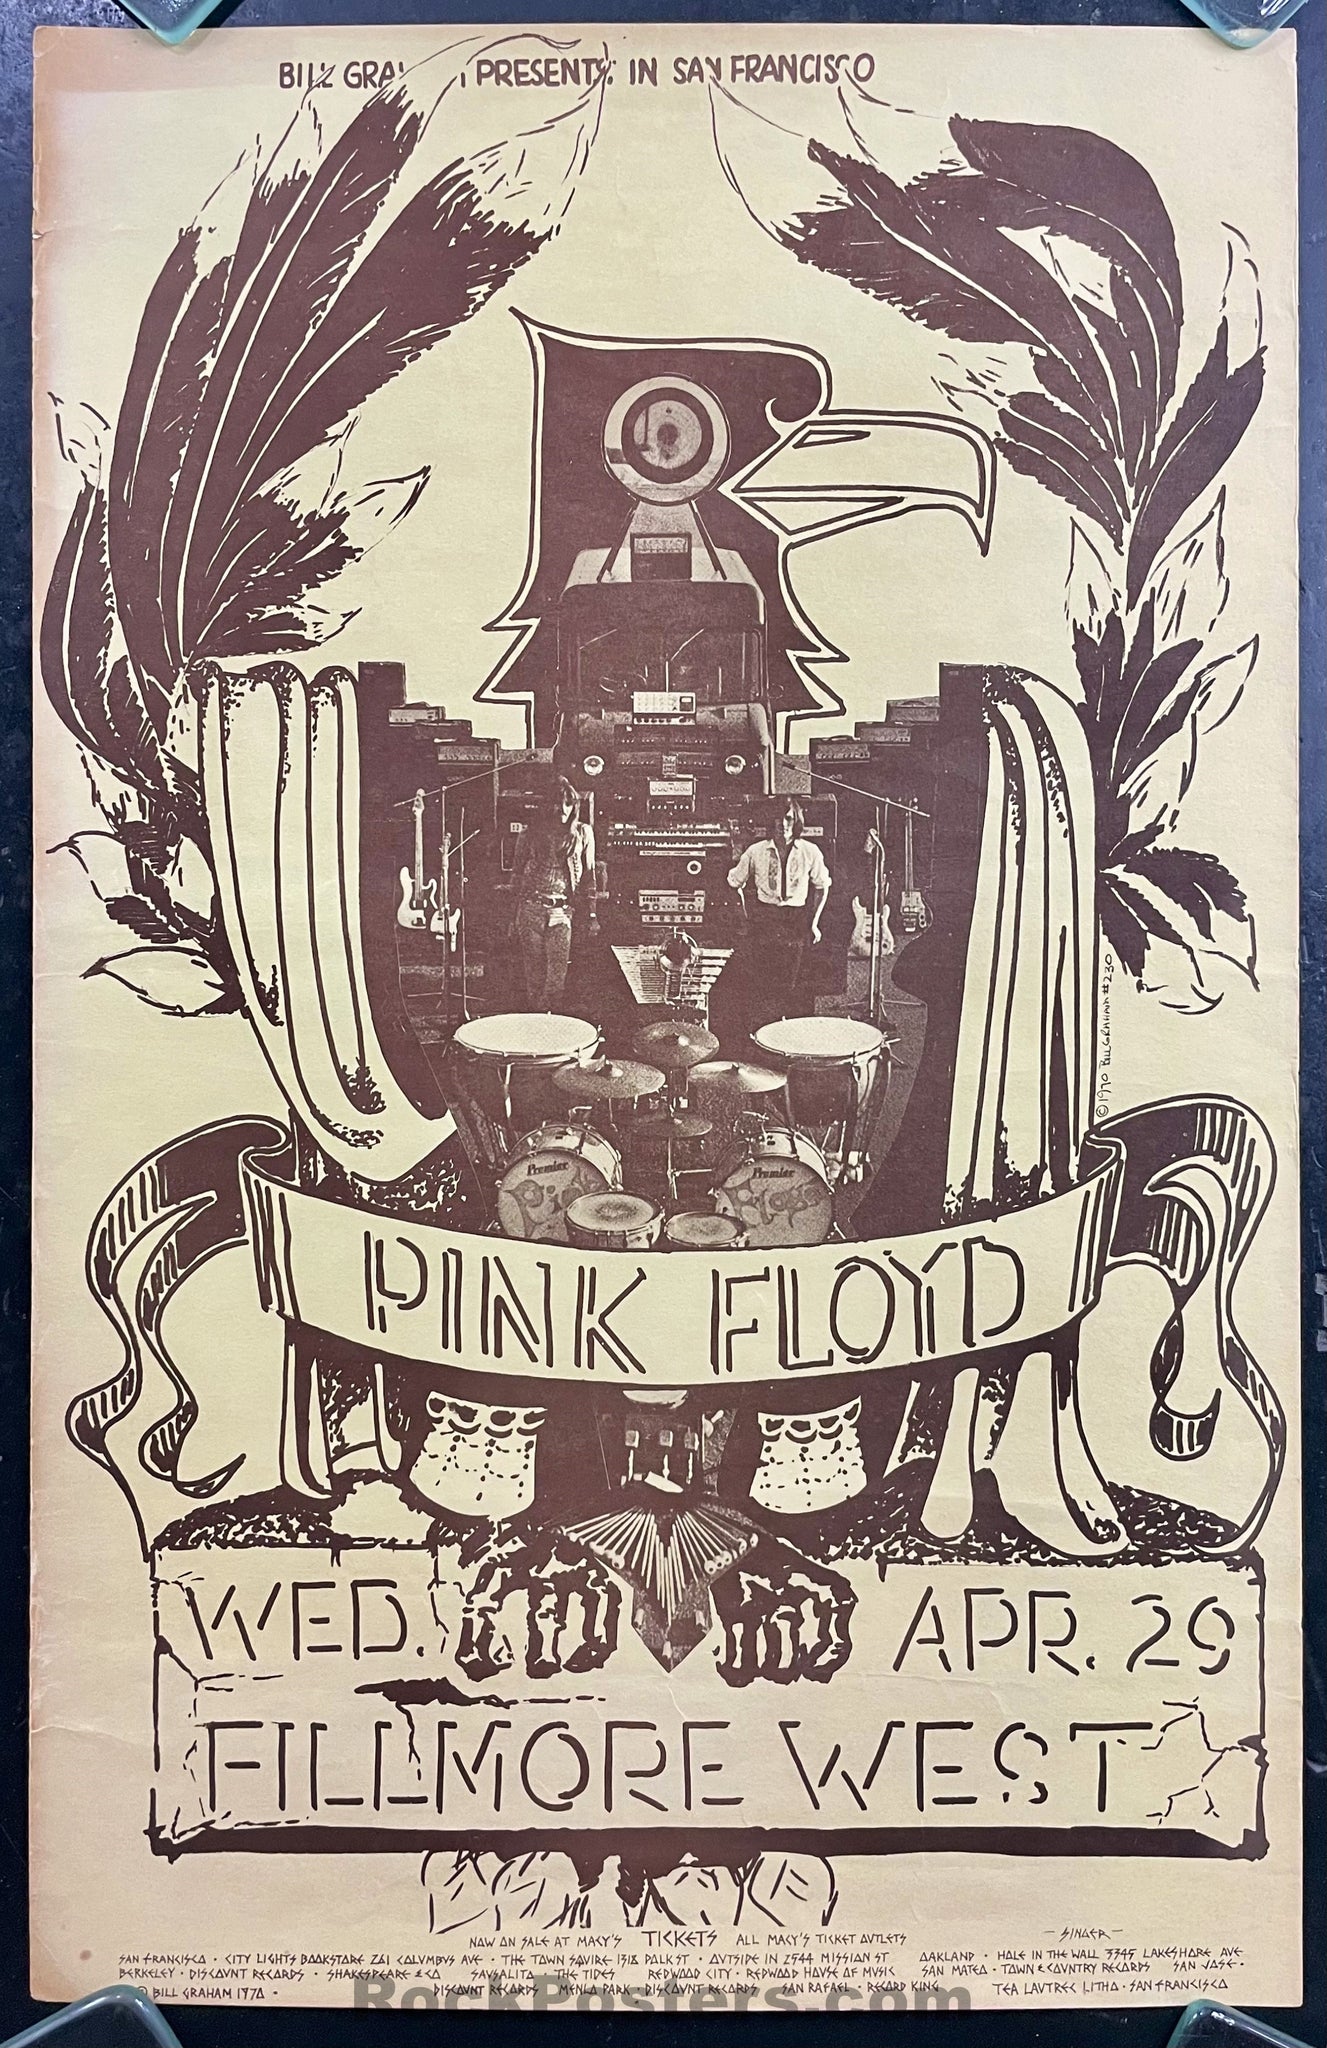 AUCTION - BG-230 - Pink Floyd - 1970 Poster - Fillmore West - Very Good